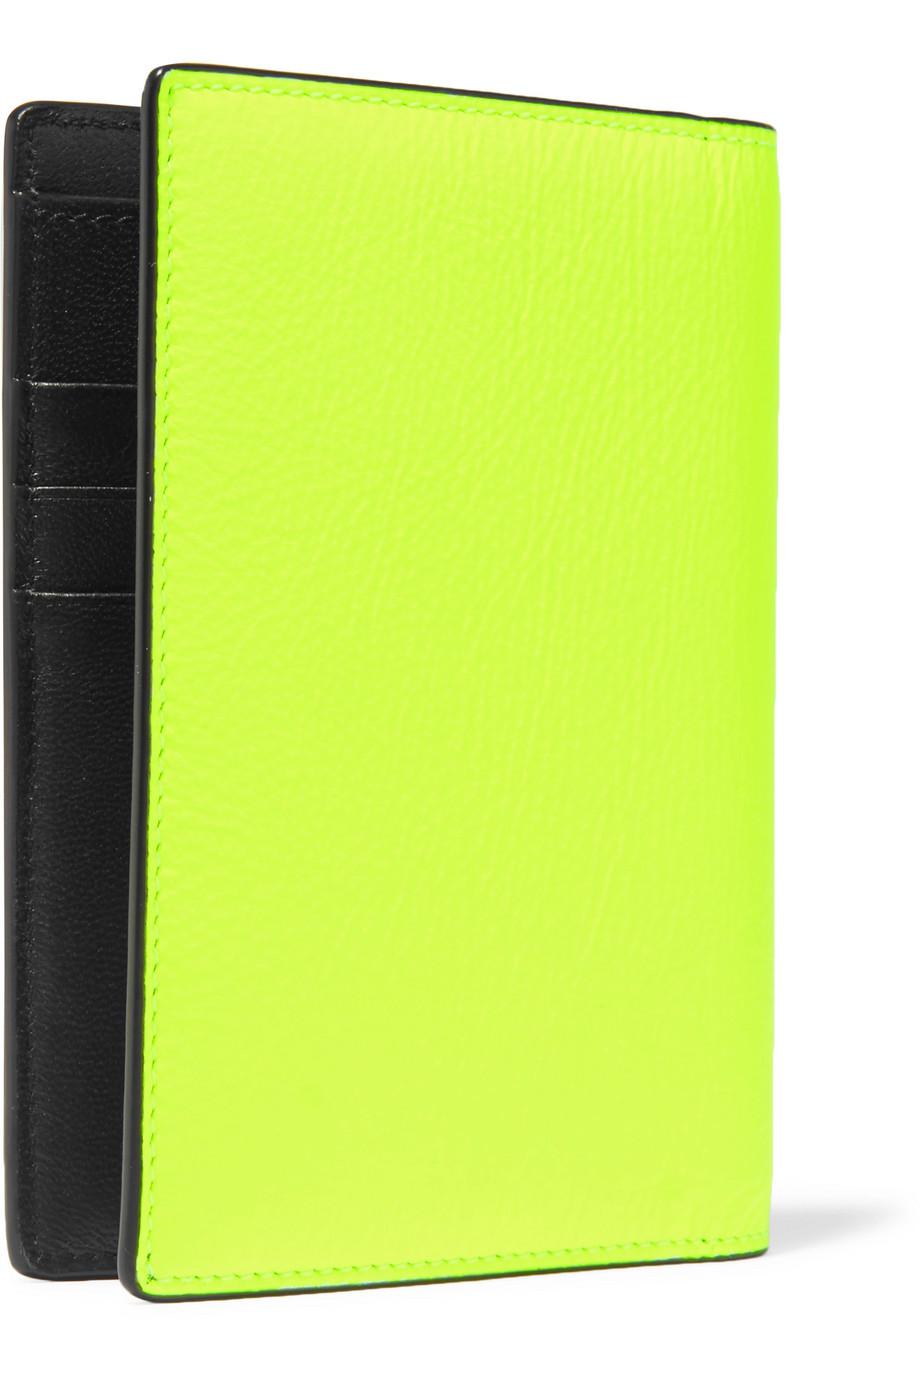 Neon Text Sign Leather Passport Holder Cover Case Travel One Pocket